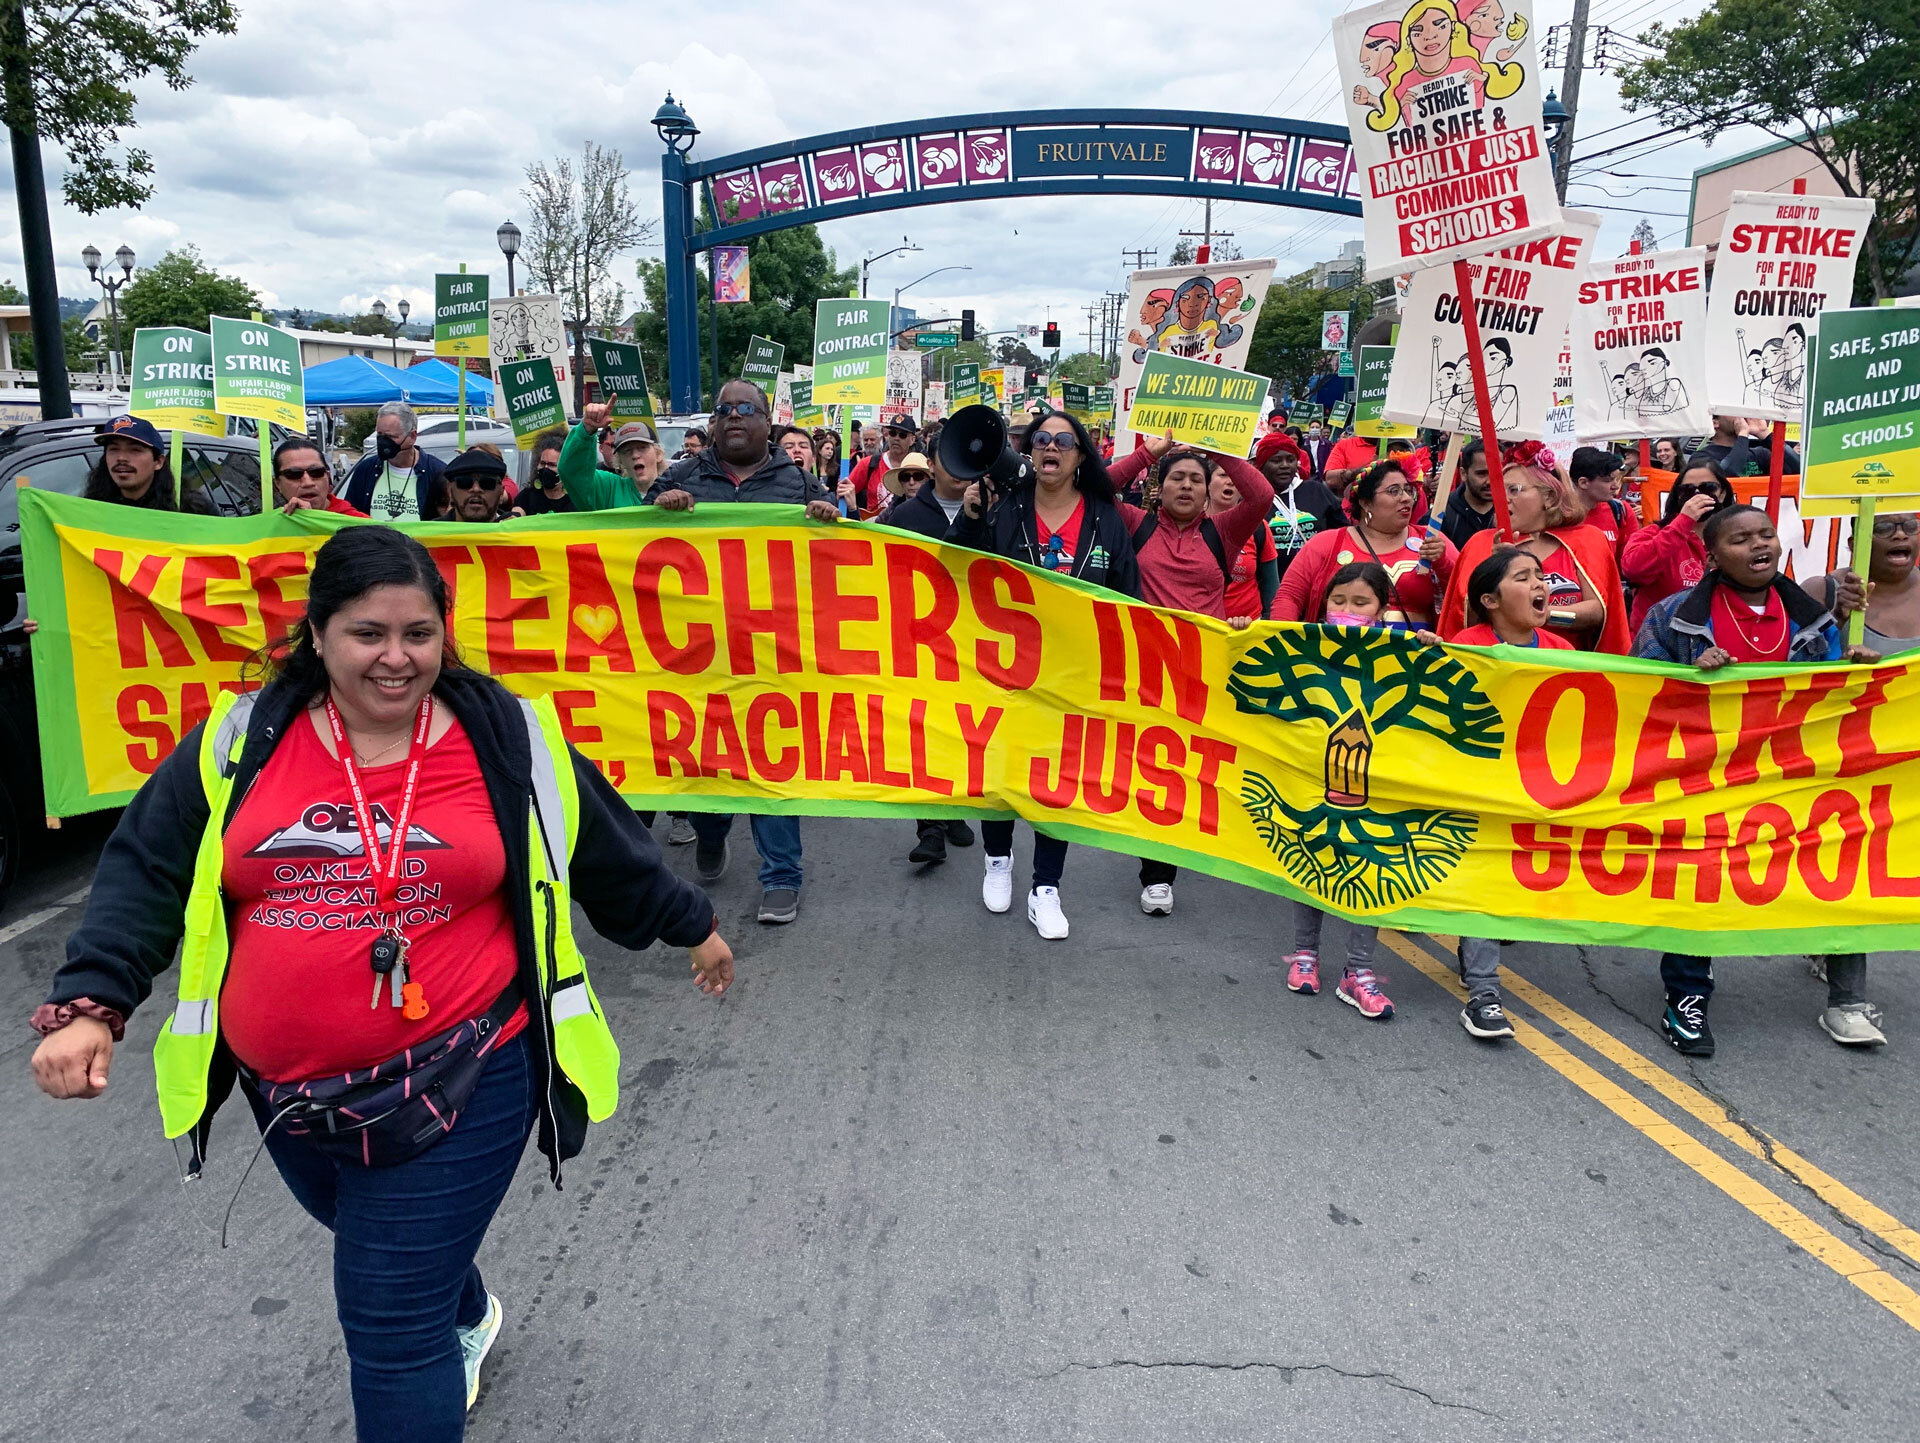 Striking teachers marching holding a big colorful banner.